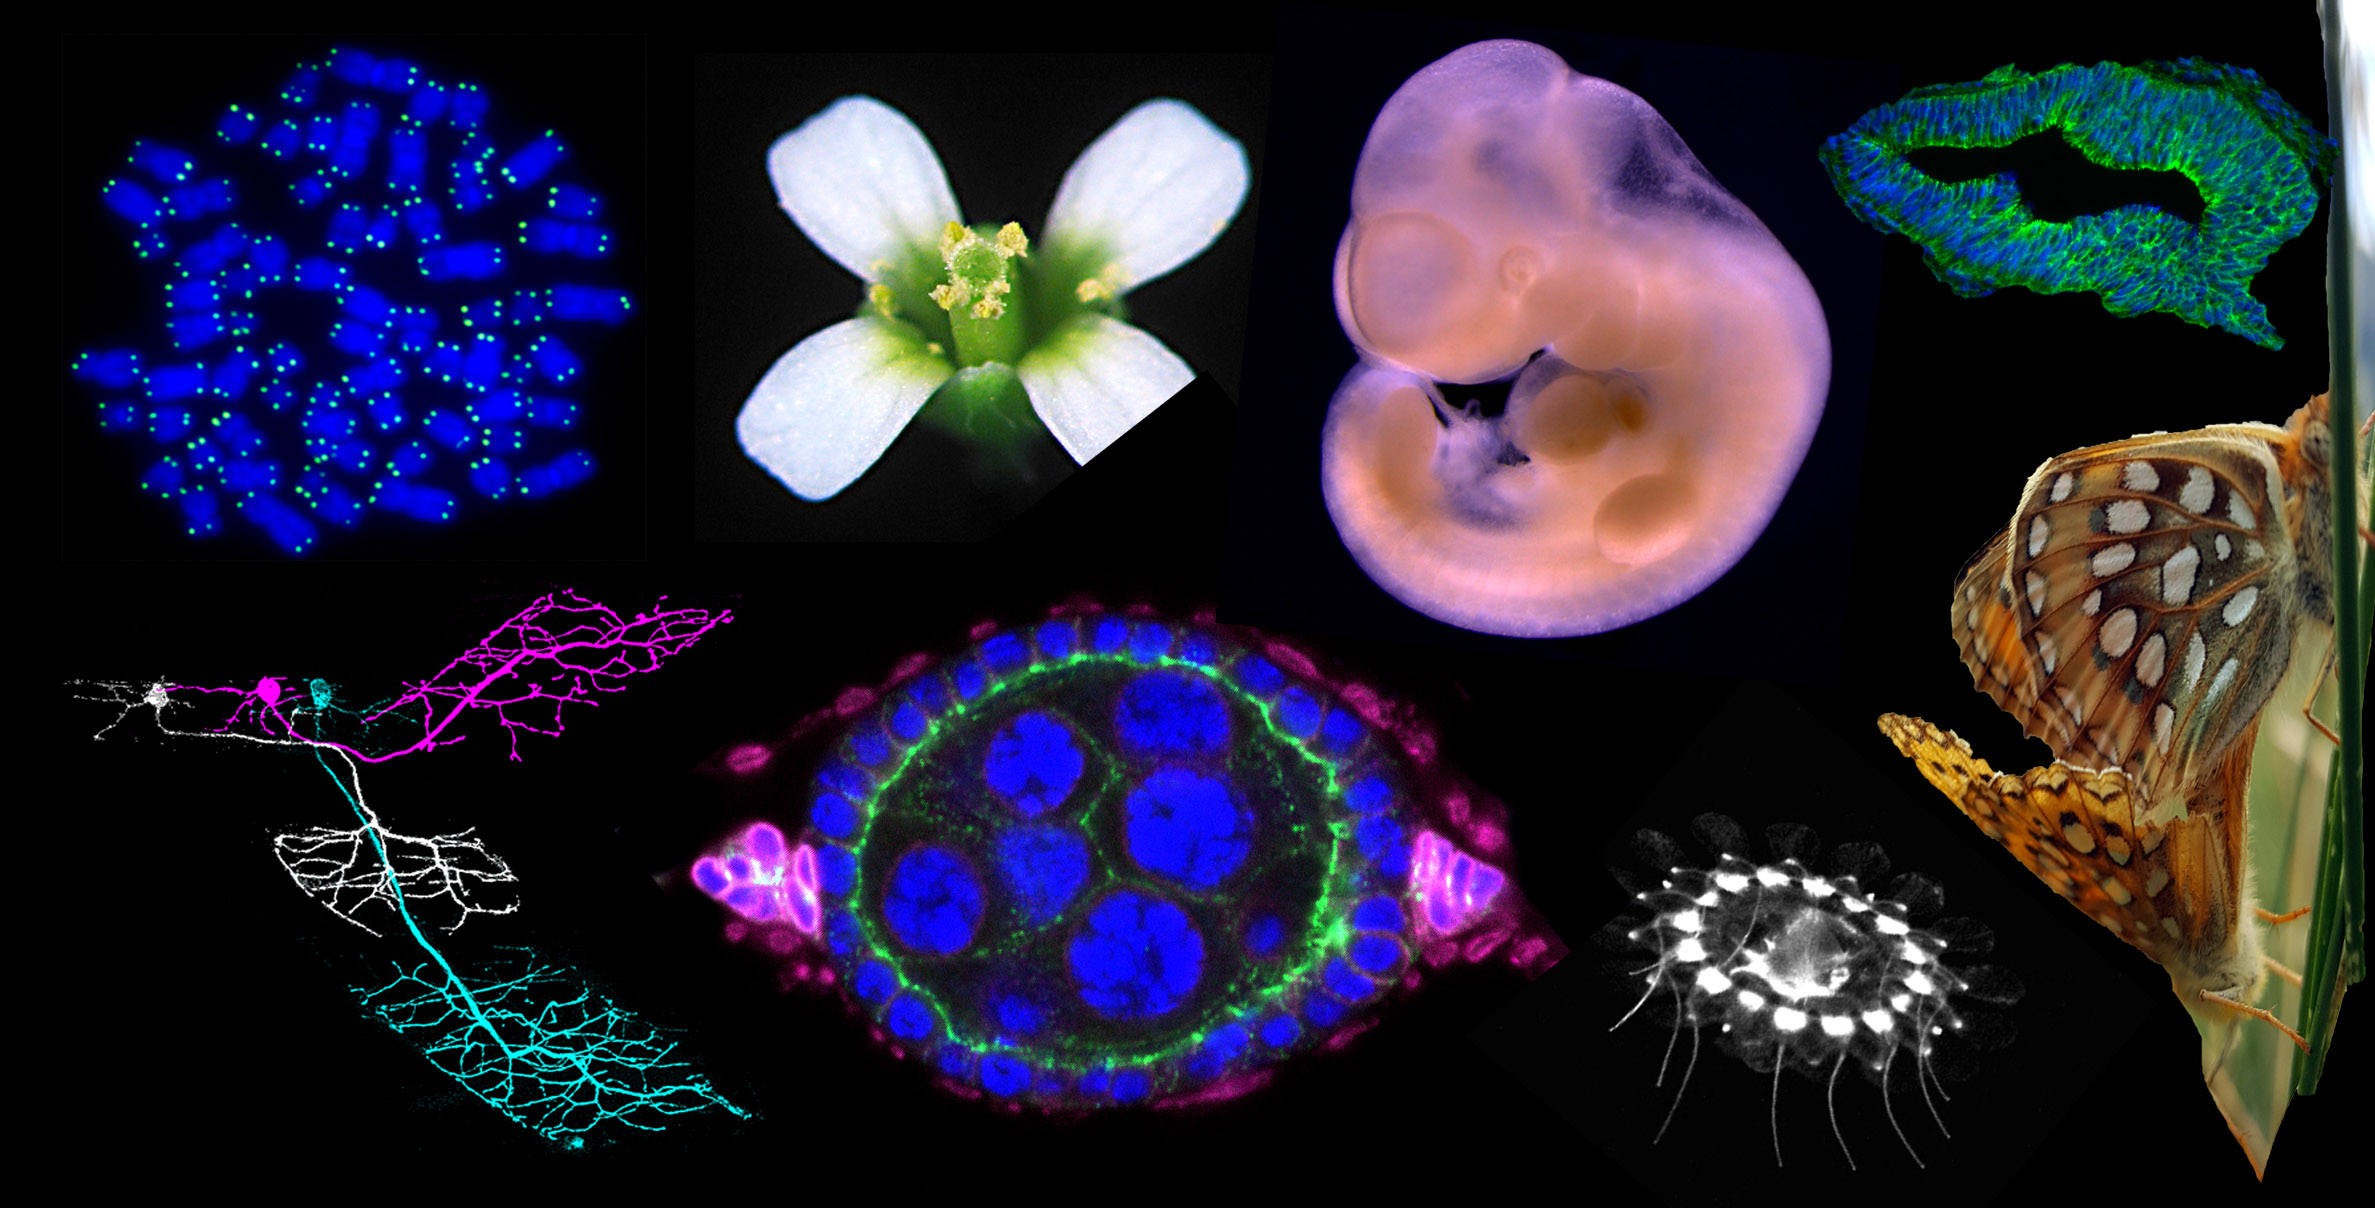 Collage of Images From Sub Disciplines within Biology